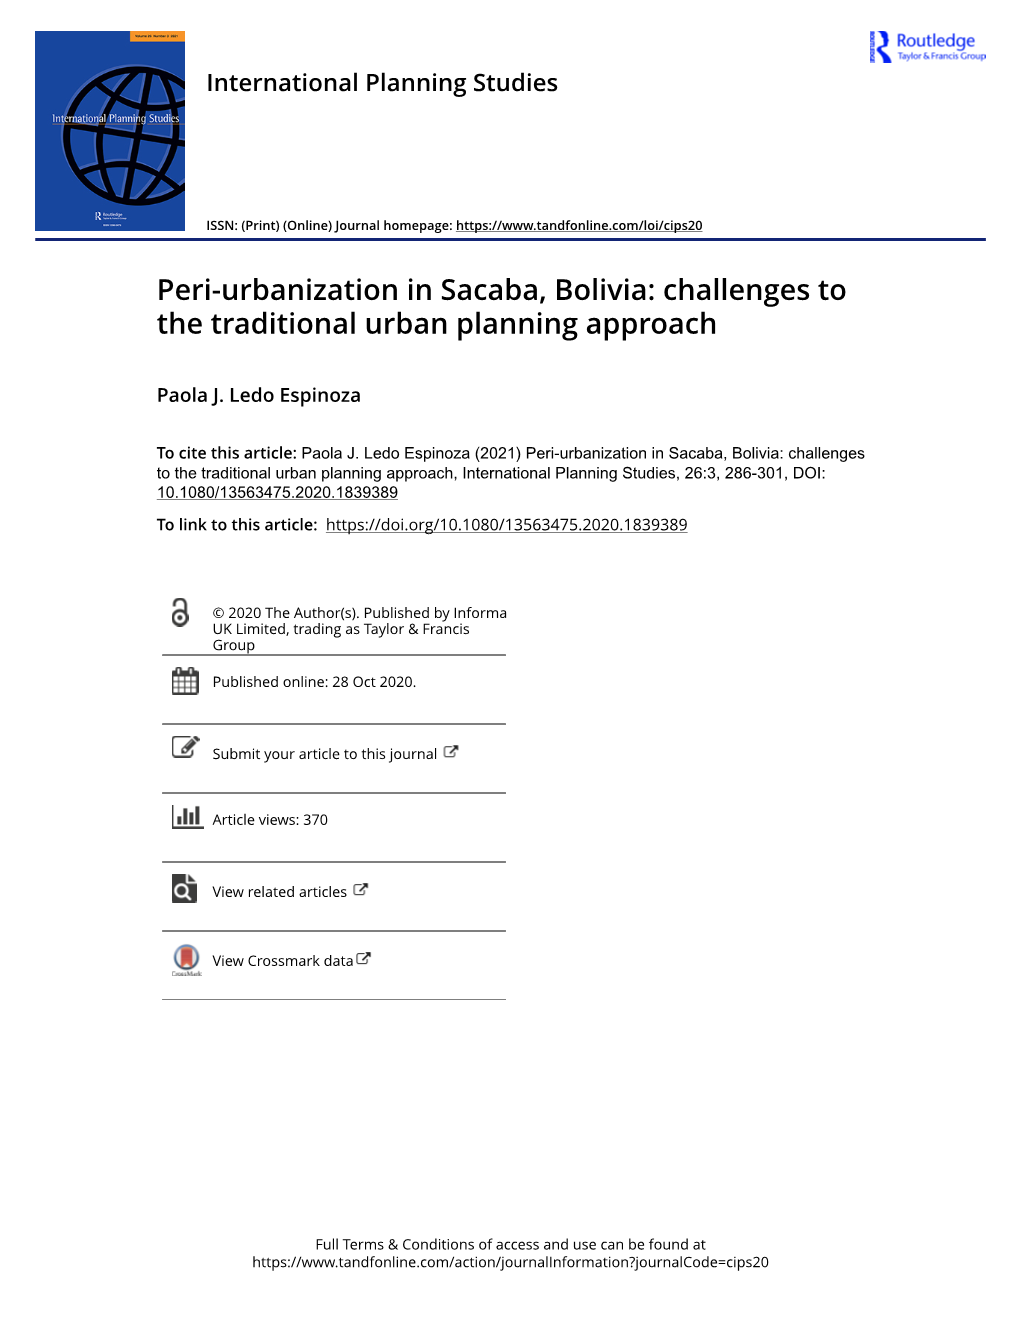 Peri-Urbanization in Sacaba, Bolivia: Challenges to the Traditional Urban Planning Approach